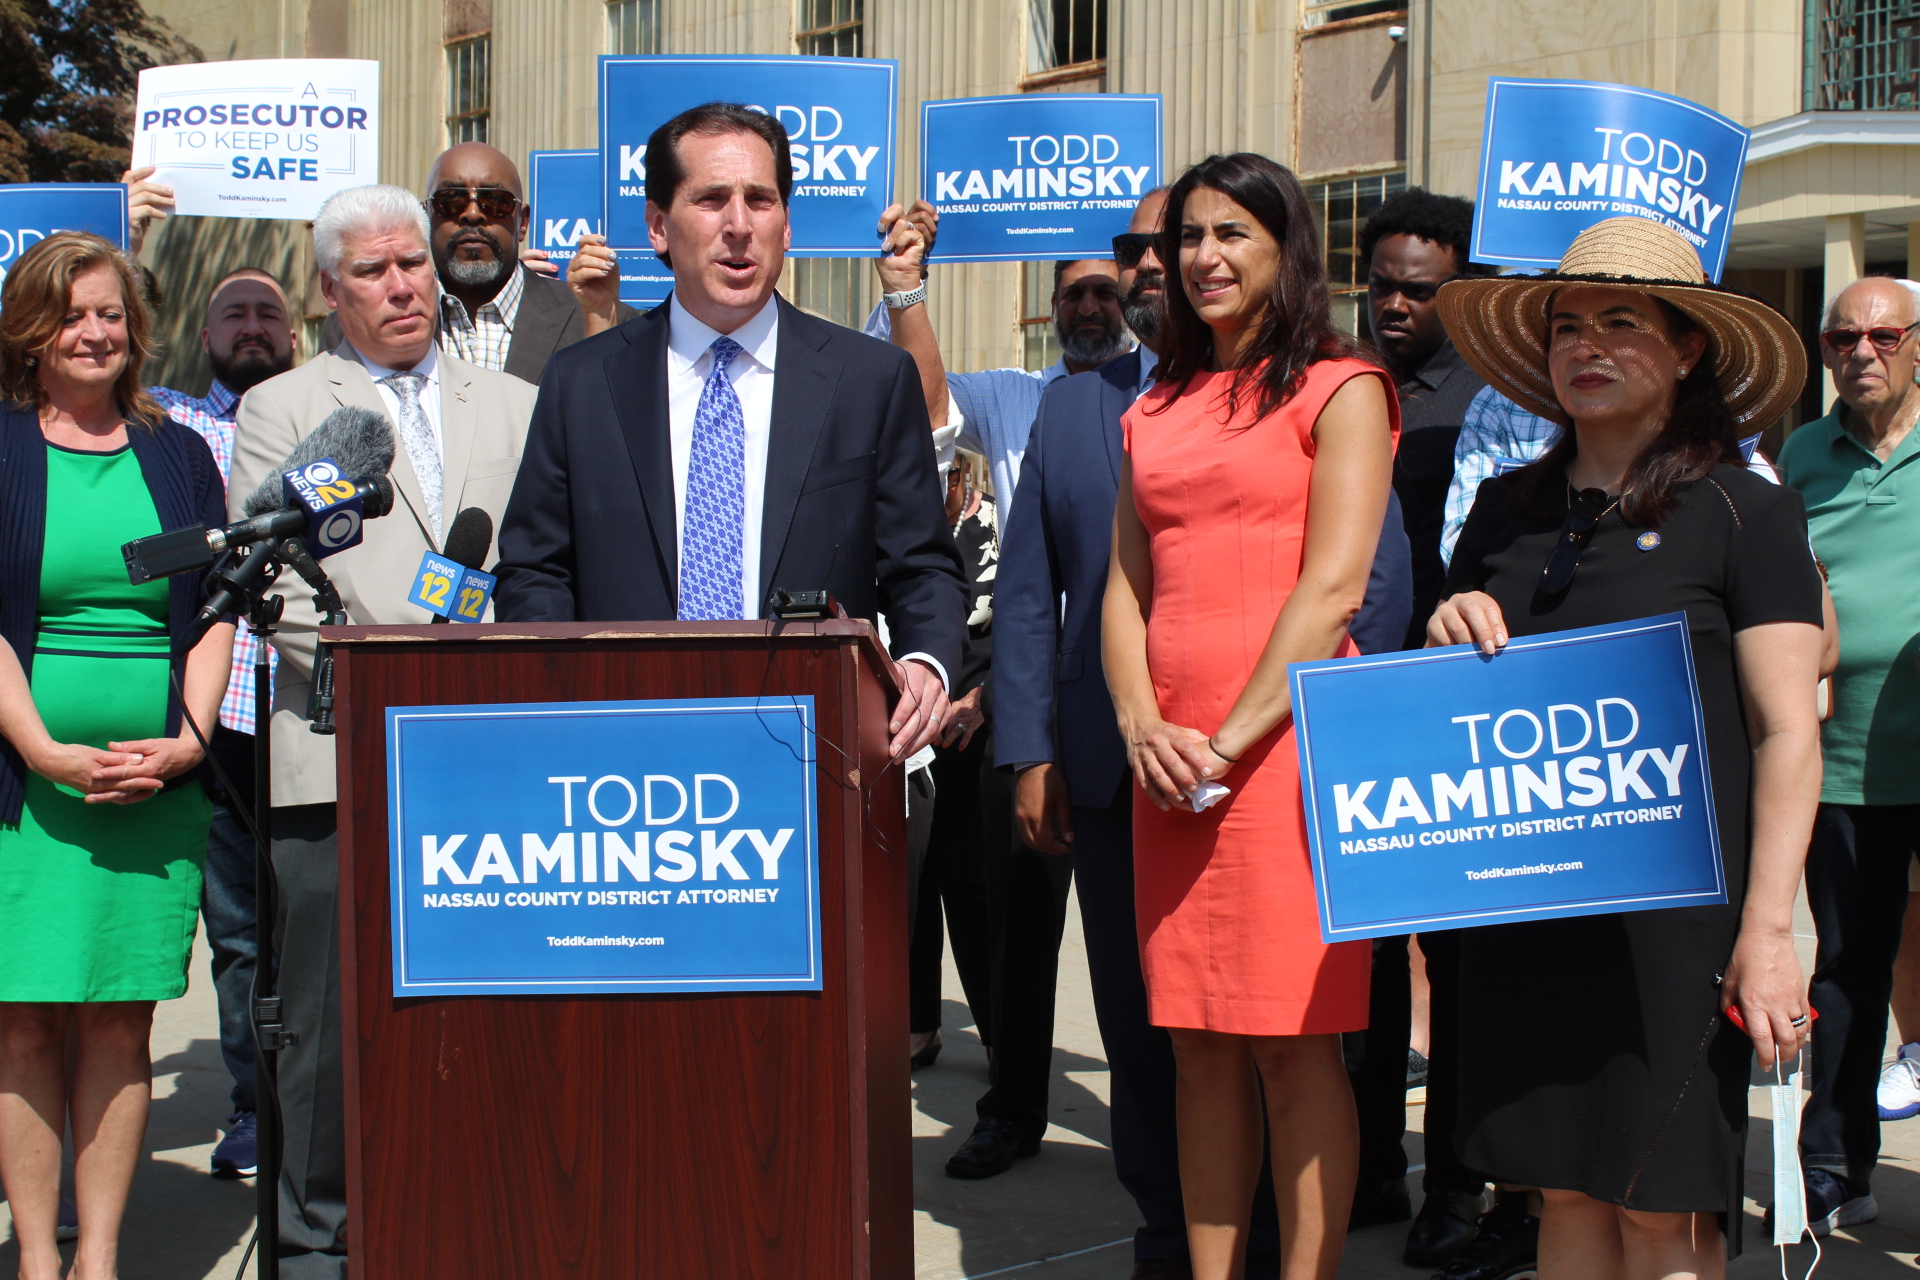 State Sen. Todd Kaminsky (D-Long Beach) announced his candidacy for Nassau County District Attorney on Monday. (Photo courtesy of the Kaminsky Campaign)